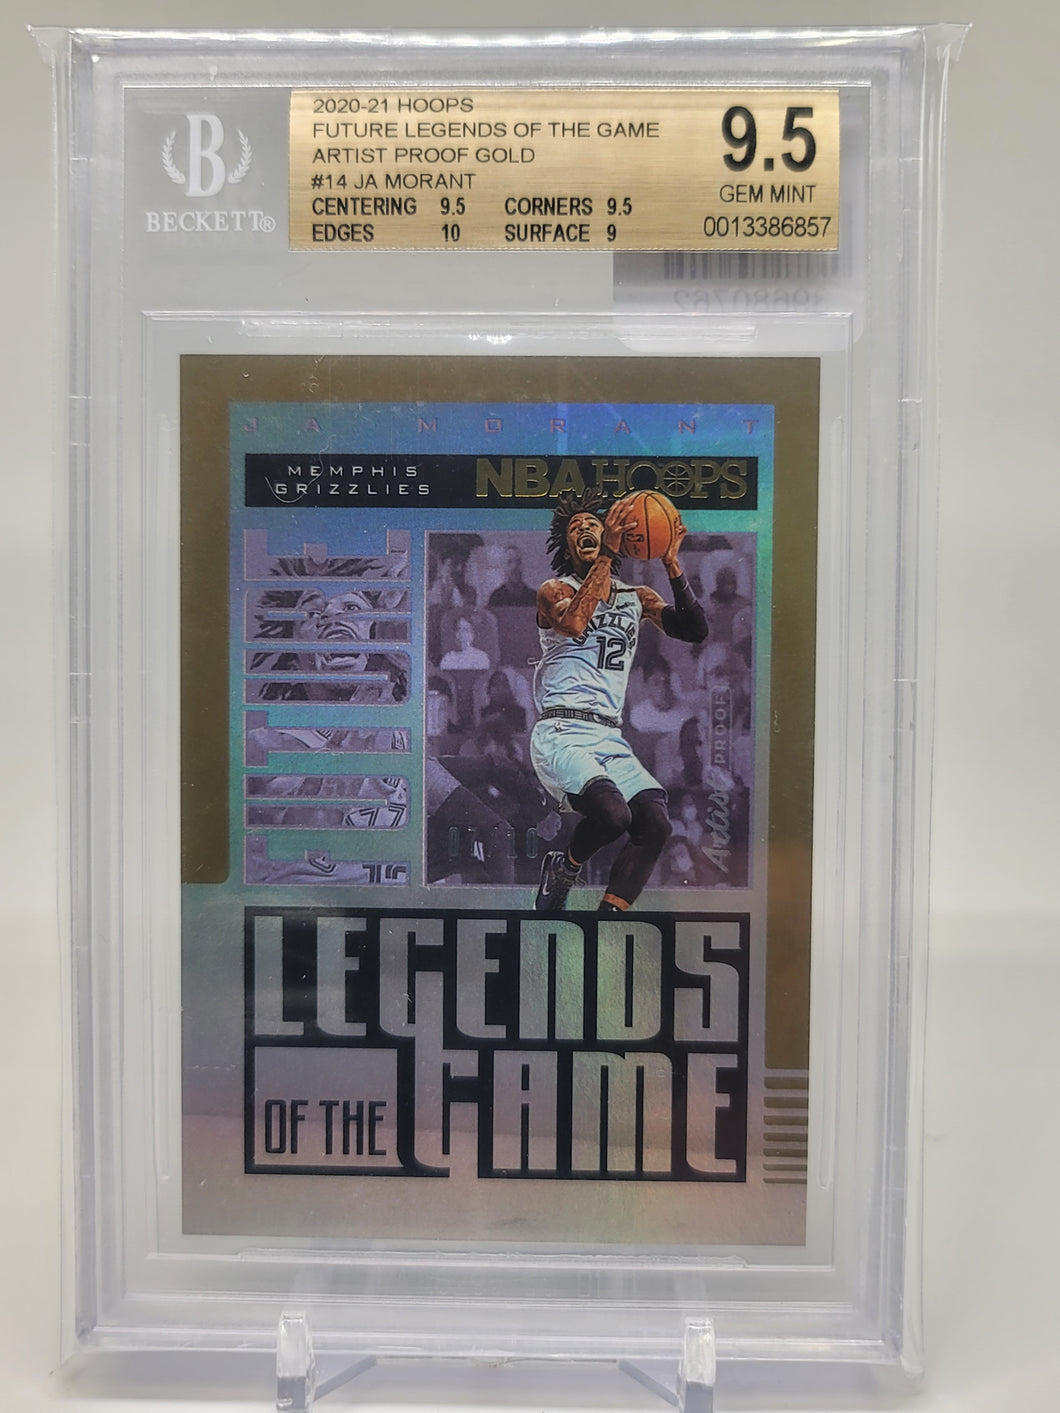 Ja Morant 2020 Hoops Future Legends of The Game Artist Proof Gold 14 #07/10 BGS 9.5    S4944